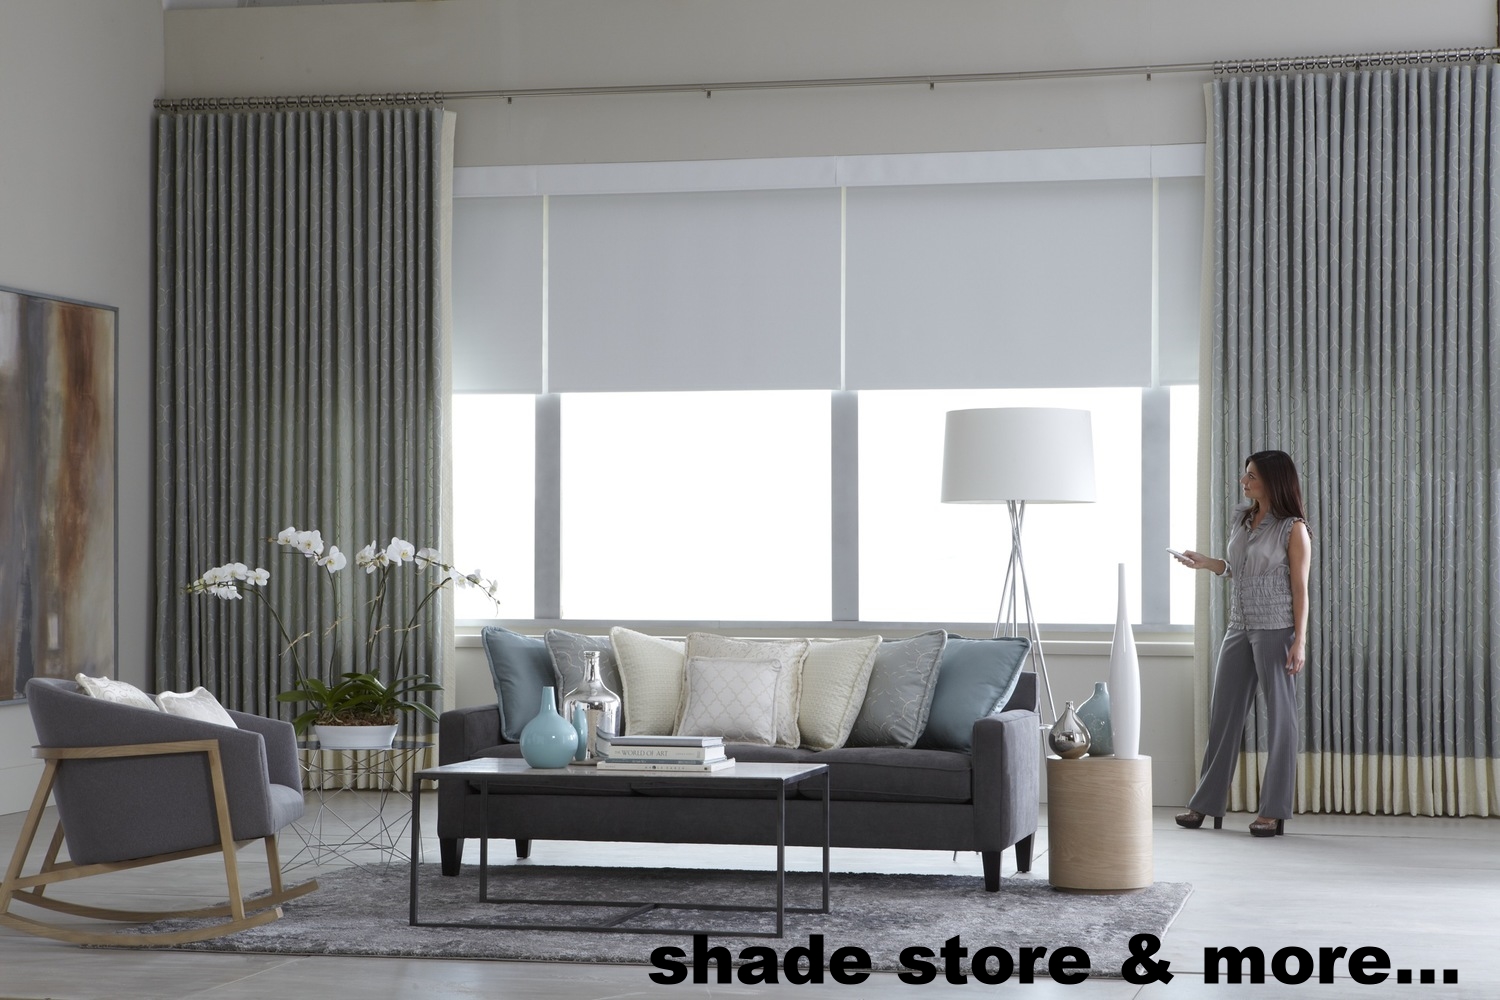 Mix Montclair Shades Window Treatments Design Services Gifts